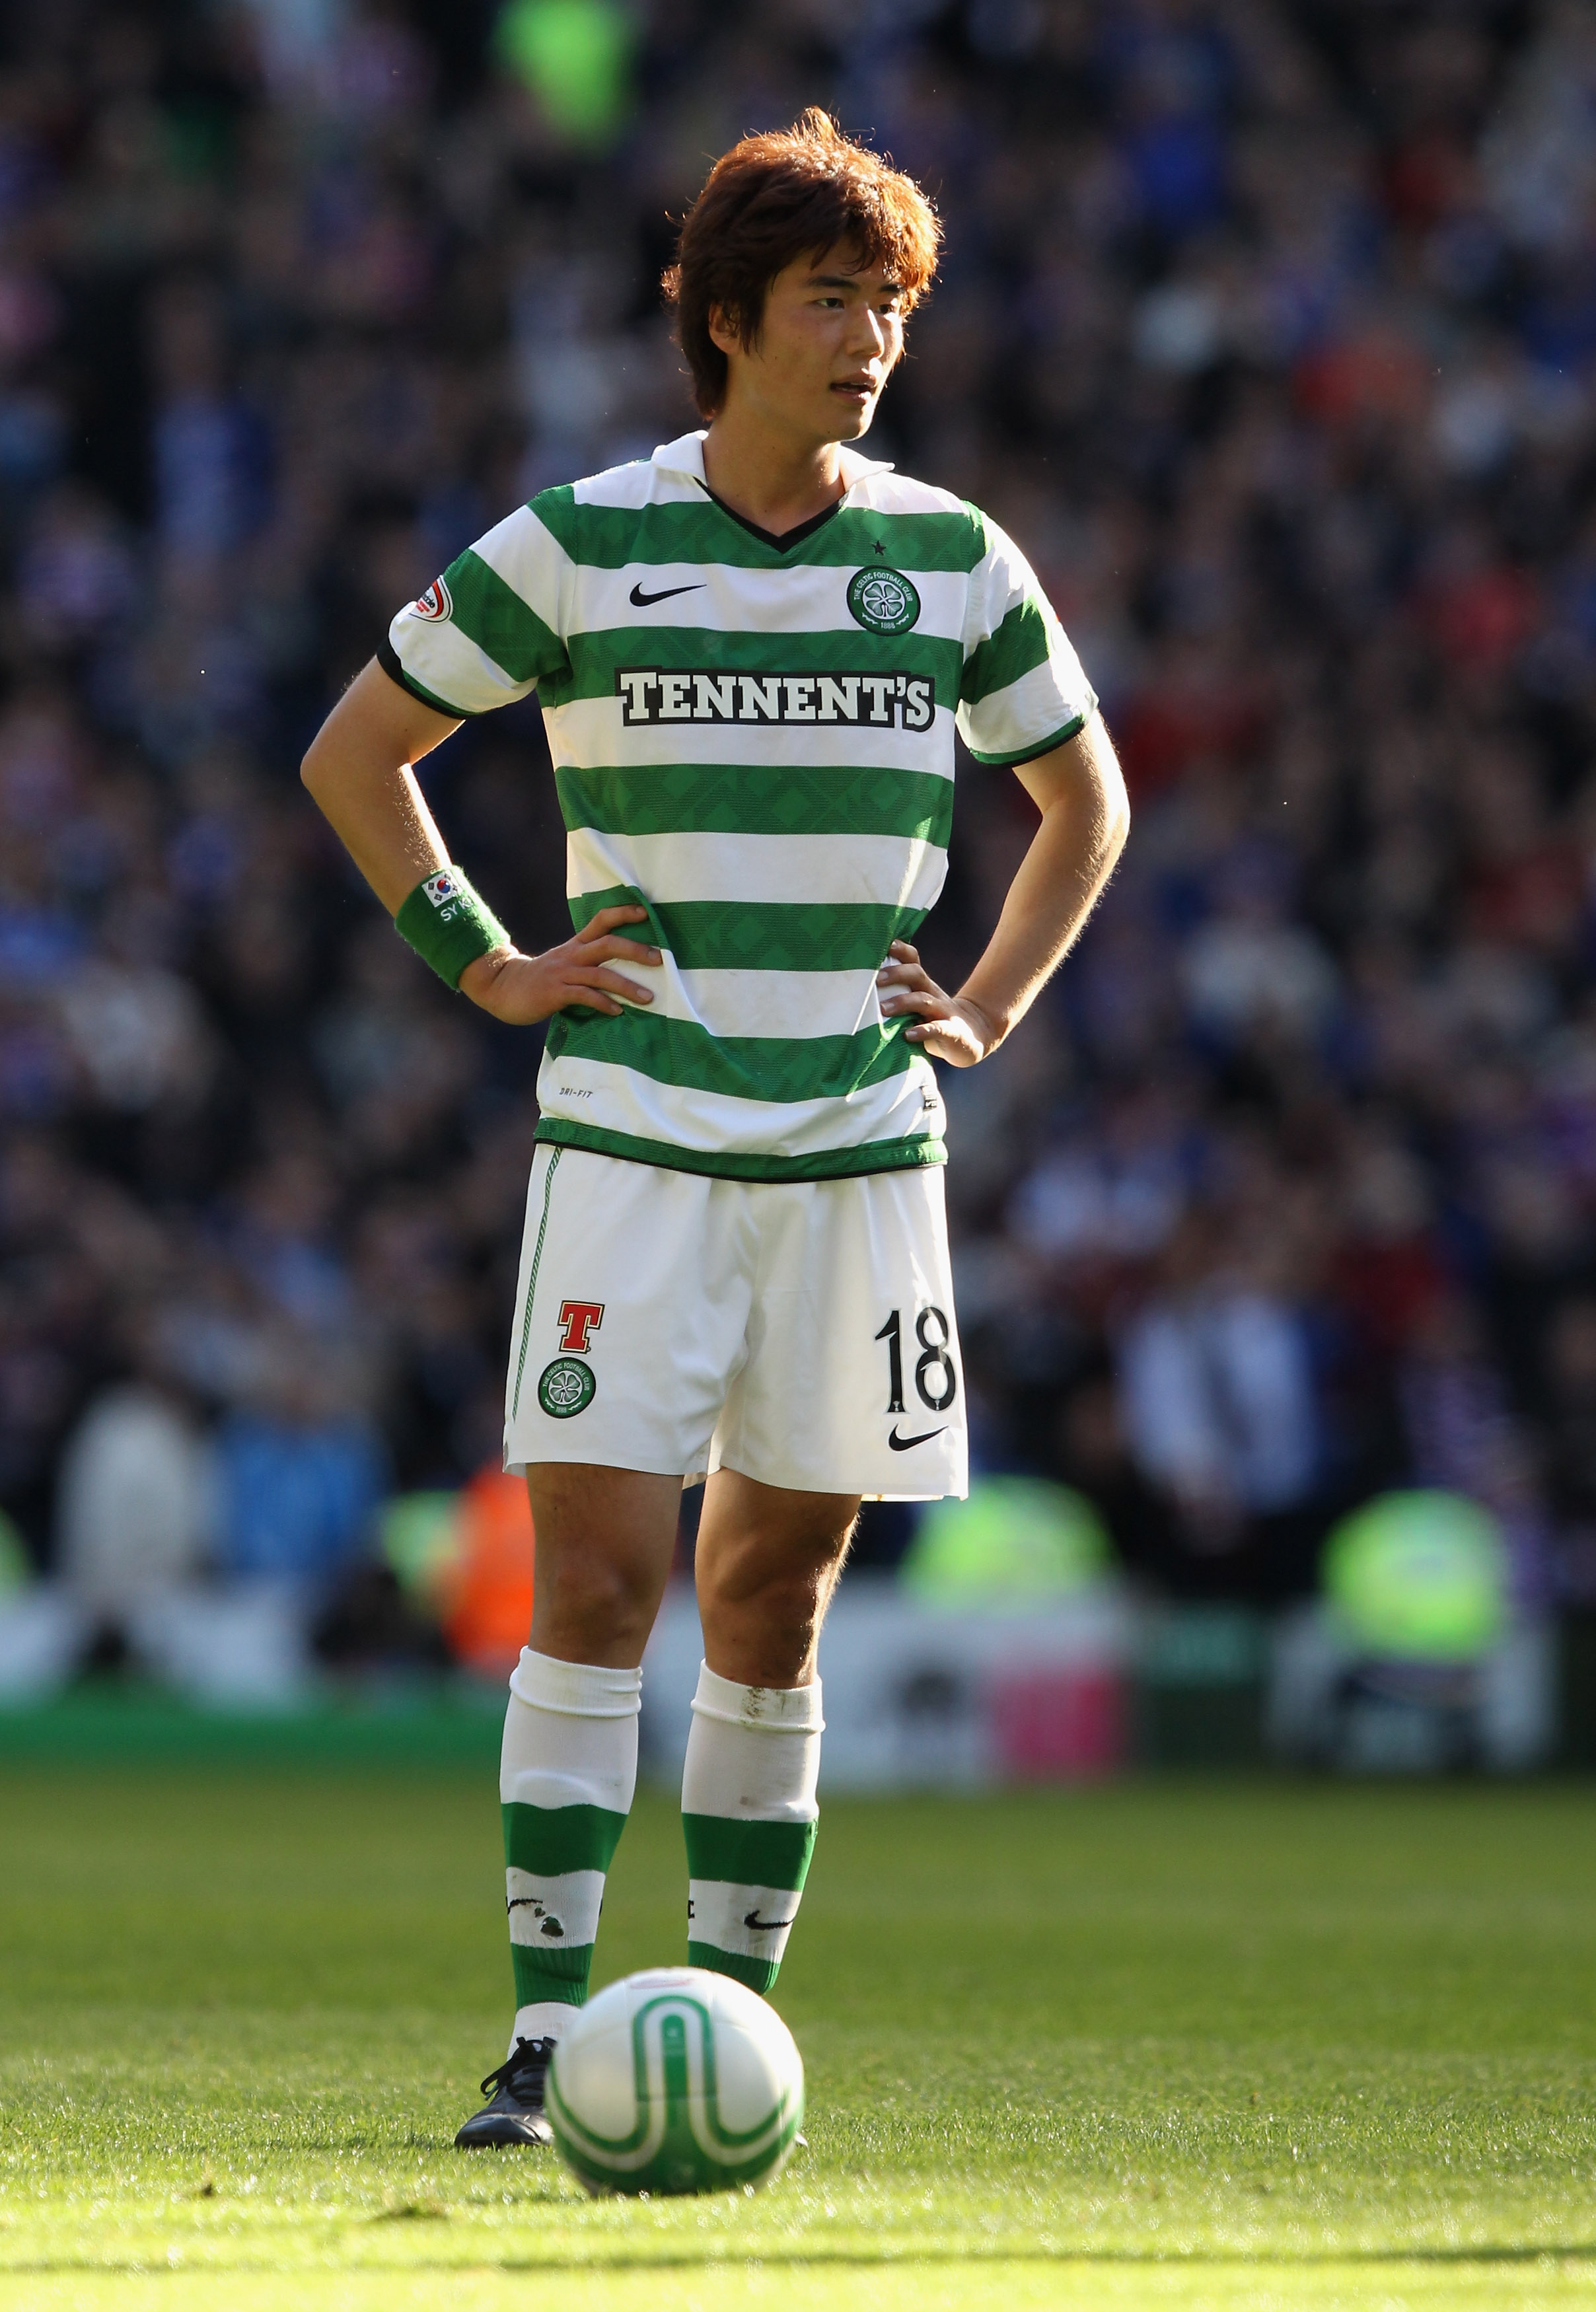 GLASGOW, SCOTLAND - OCTOBER 24:  Ki Sung Yeung of Celtic in action during the Clydesdale Bank Premier League match between Celtic and Rangers at Celtic Park on October 24, 2010 in Glasgow, Scotland.  (Photo by Clive Brunskill/Getty Images)